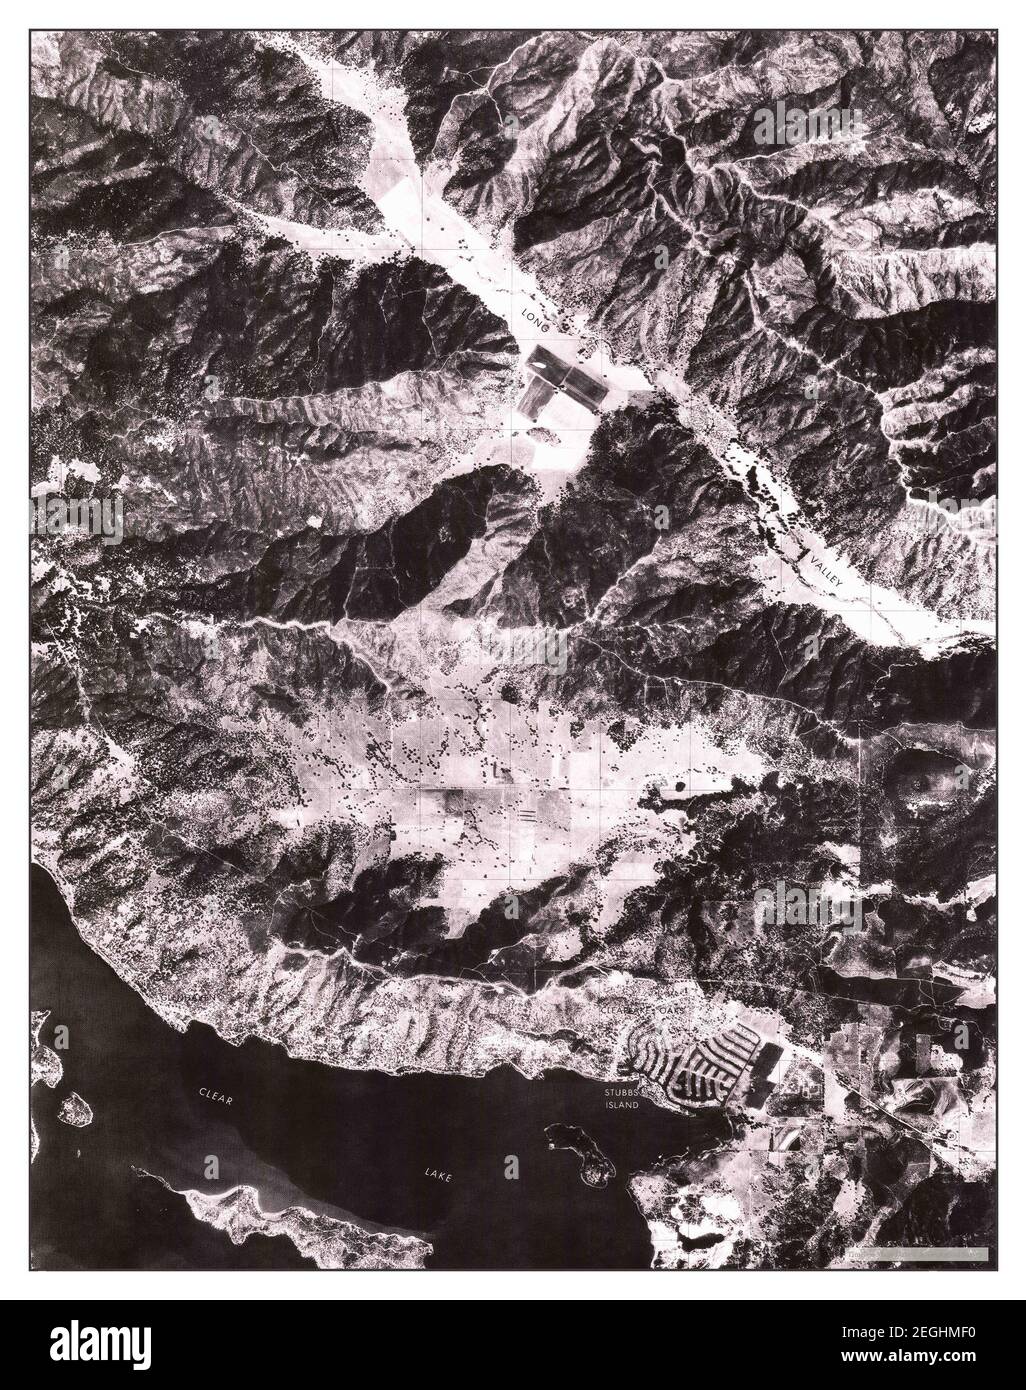 Clearlake Oaks, California, map 1977, 1:24000, United States of America by Timeless Maps, data U.S. Geological Survey Stock Photo